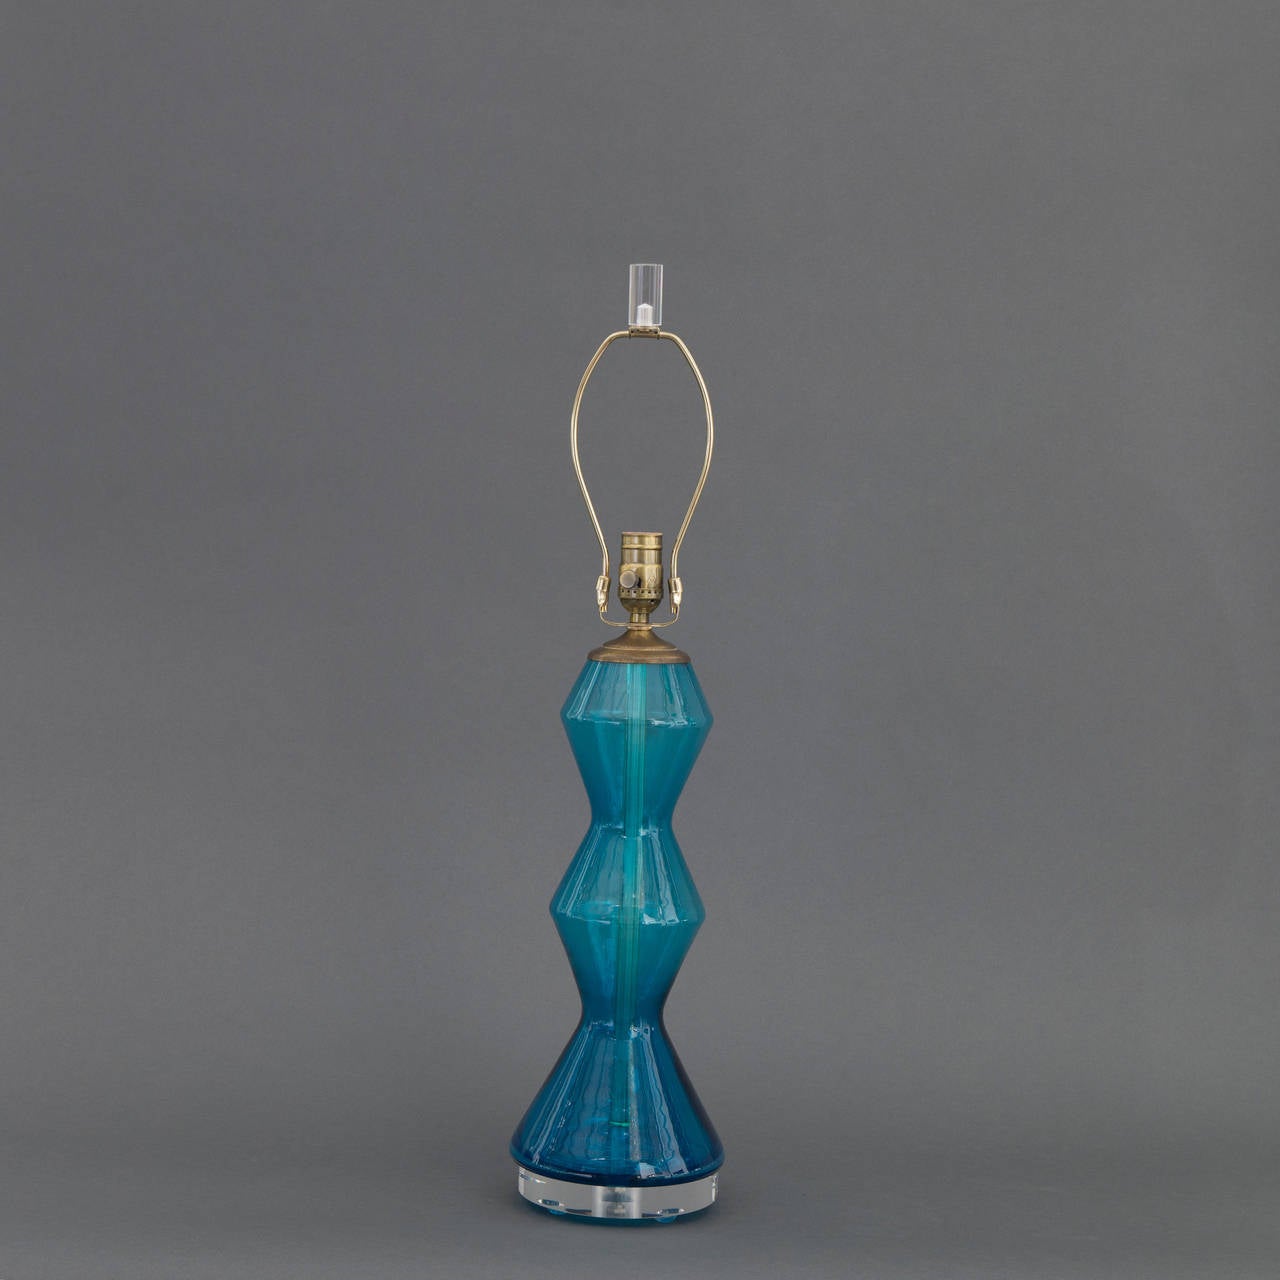 This beautiful goemetric hand blown Muran glass lamp is a most unique shade of blue falling somewhere between teal and acqua. We have added the Lucite bases for an updated luxe look. The lampshade is not included; however, can be purchases at